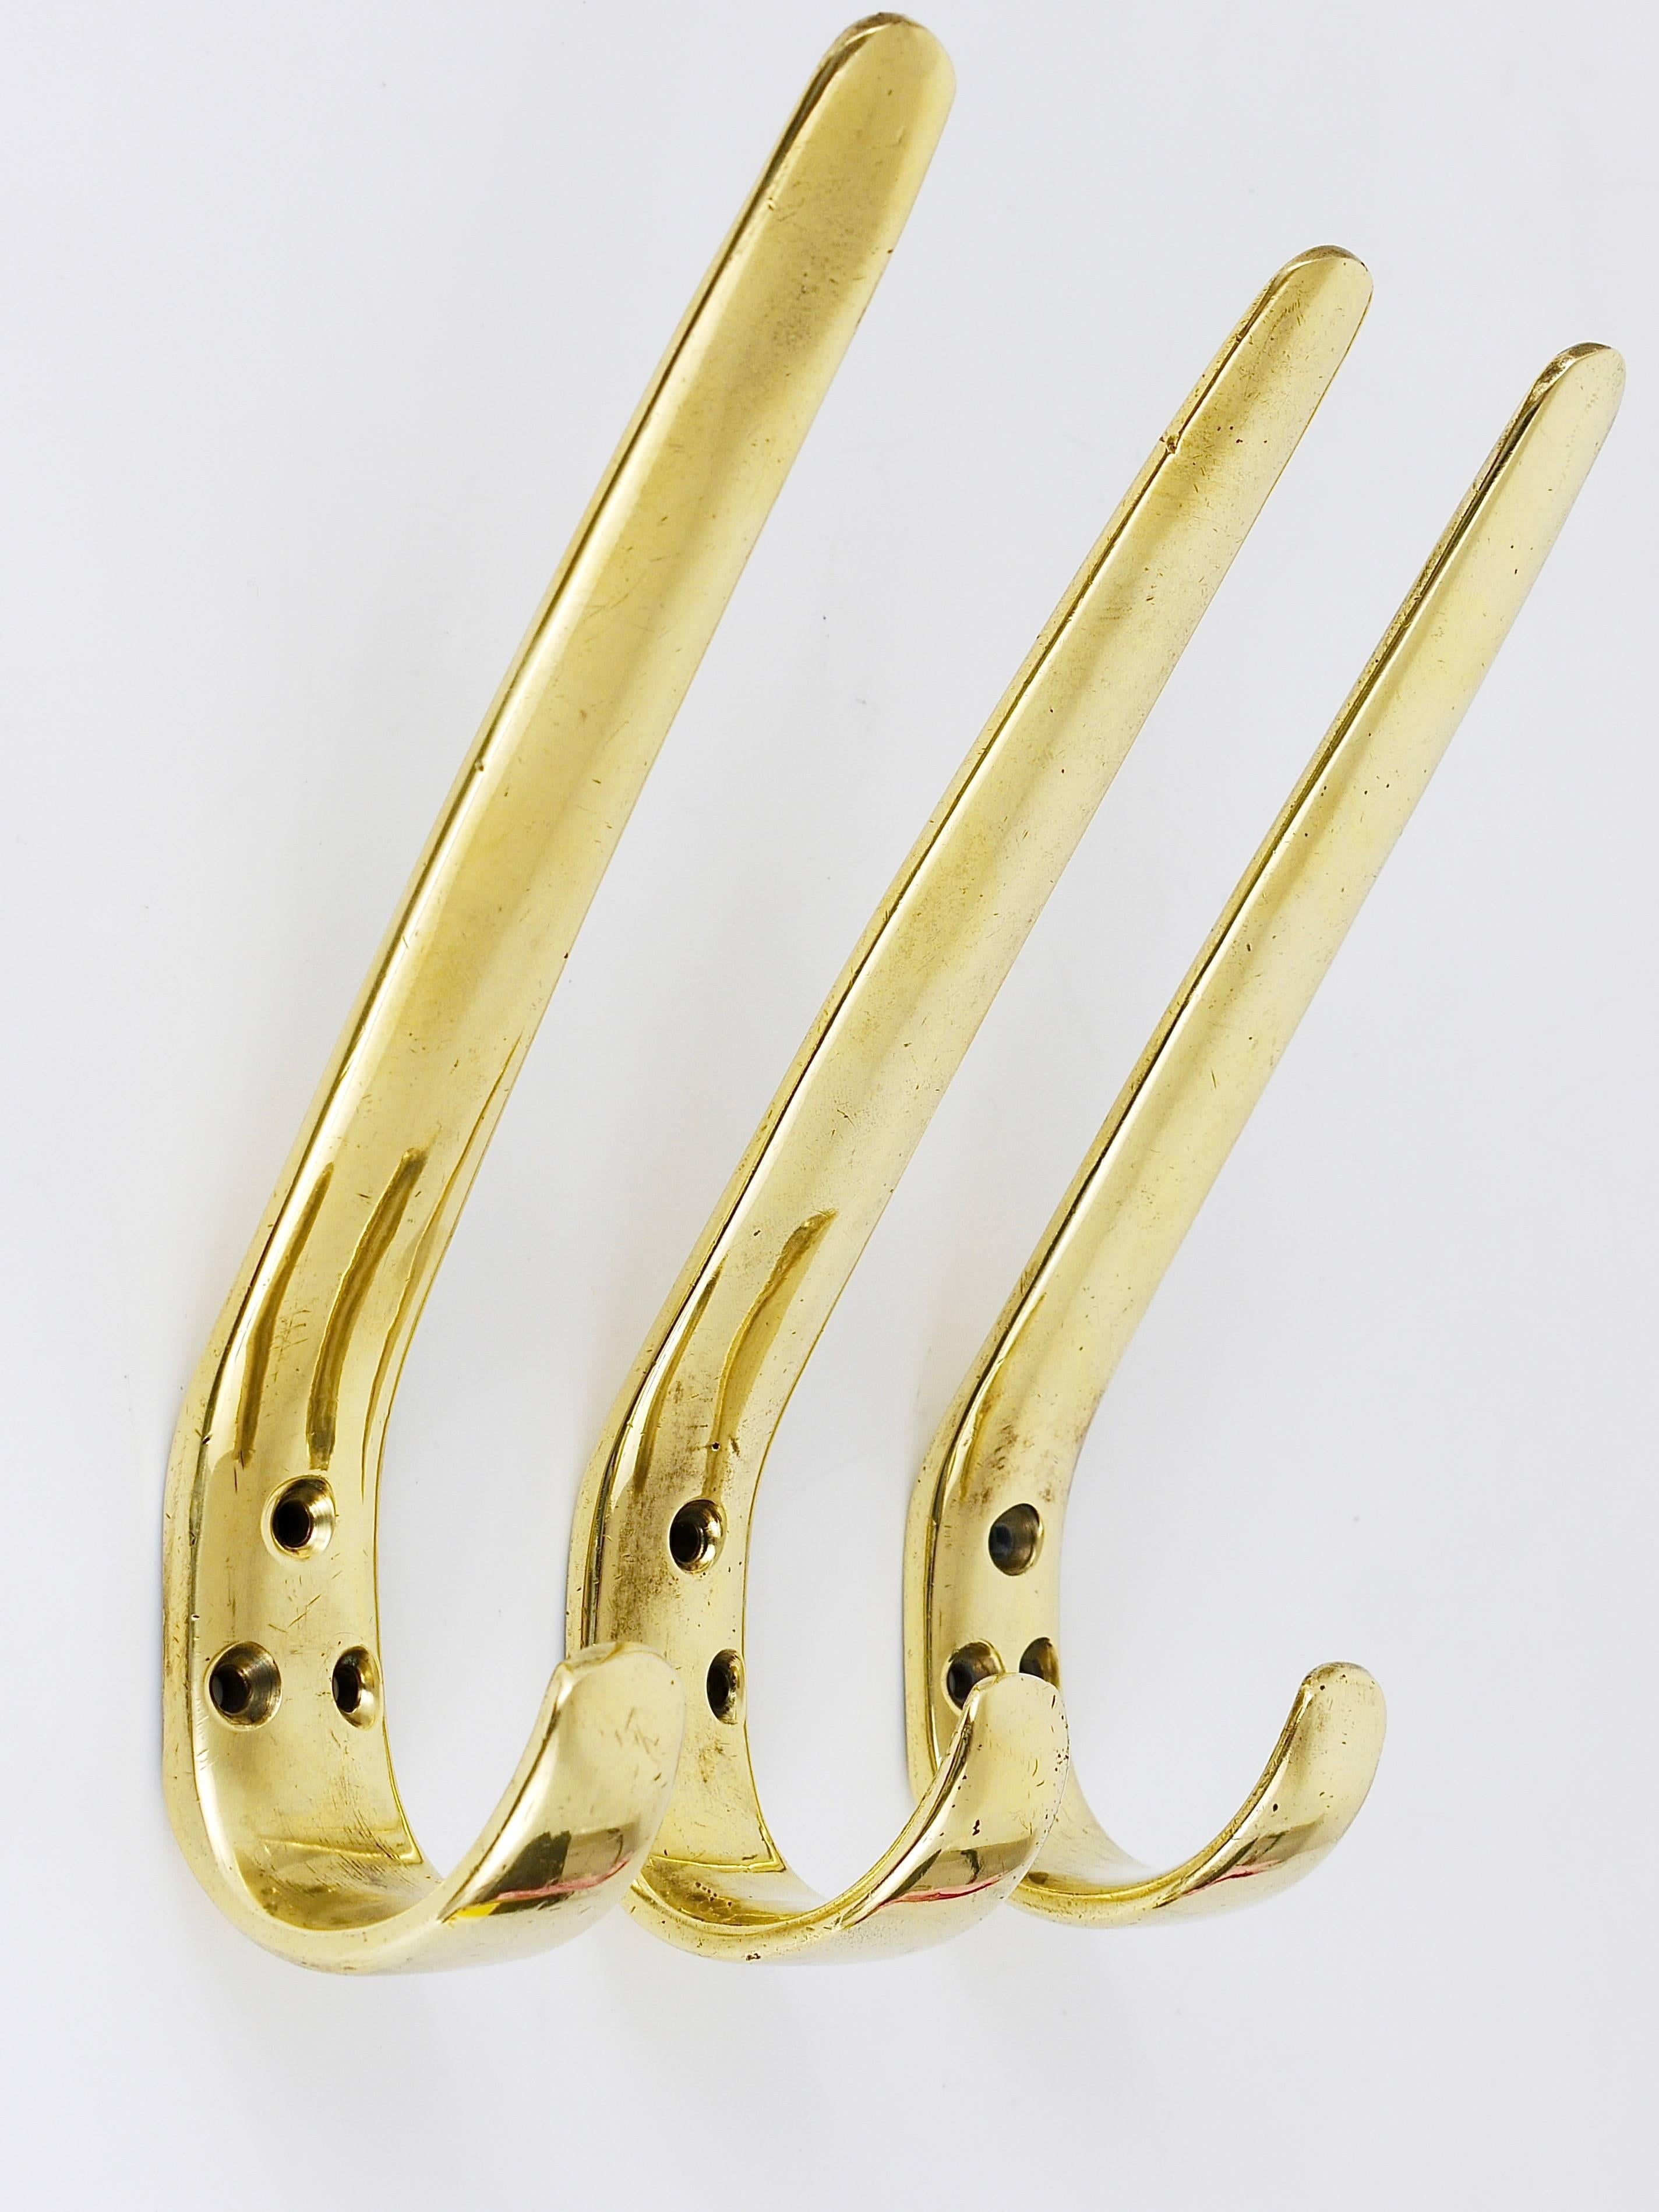 Three beautiful modernist brass wall hooks, manufactured in the 1950s by Hertha Baller, Austria. Gently polished by hand, in excellent condition with nice patina. The price is for the set of three hooks.